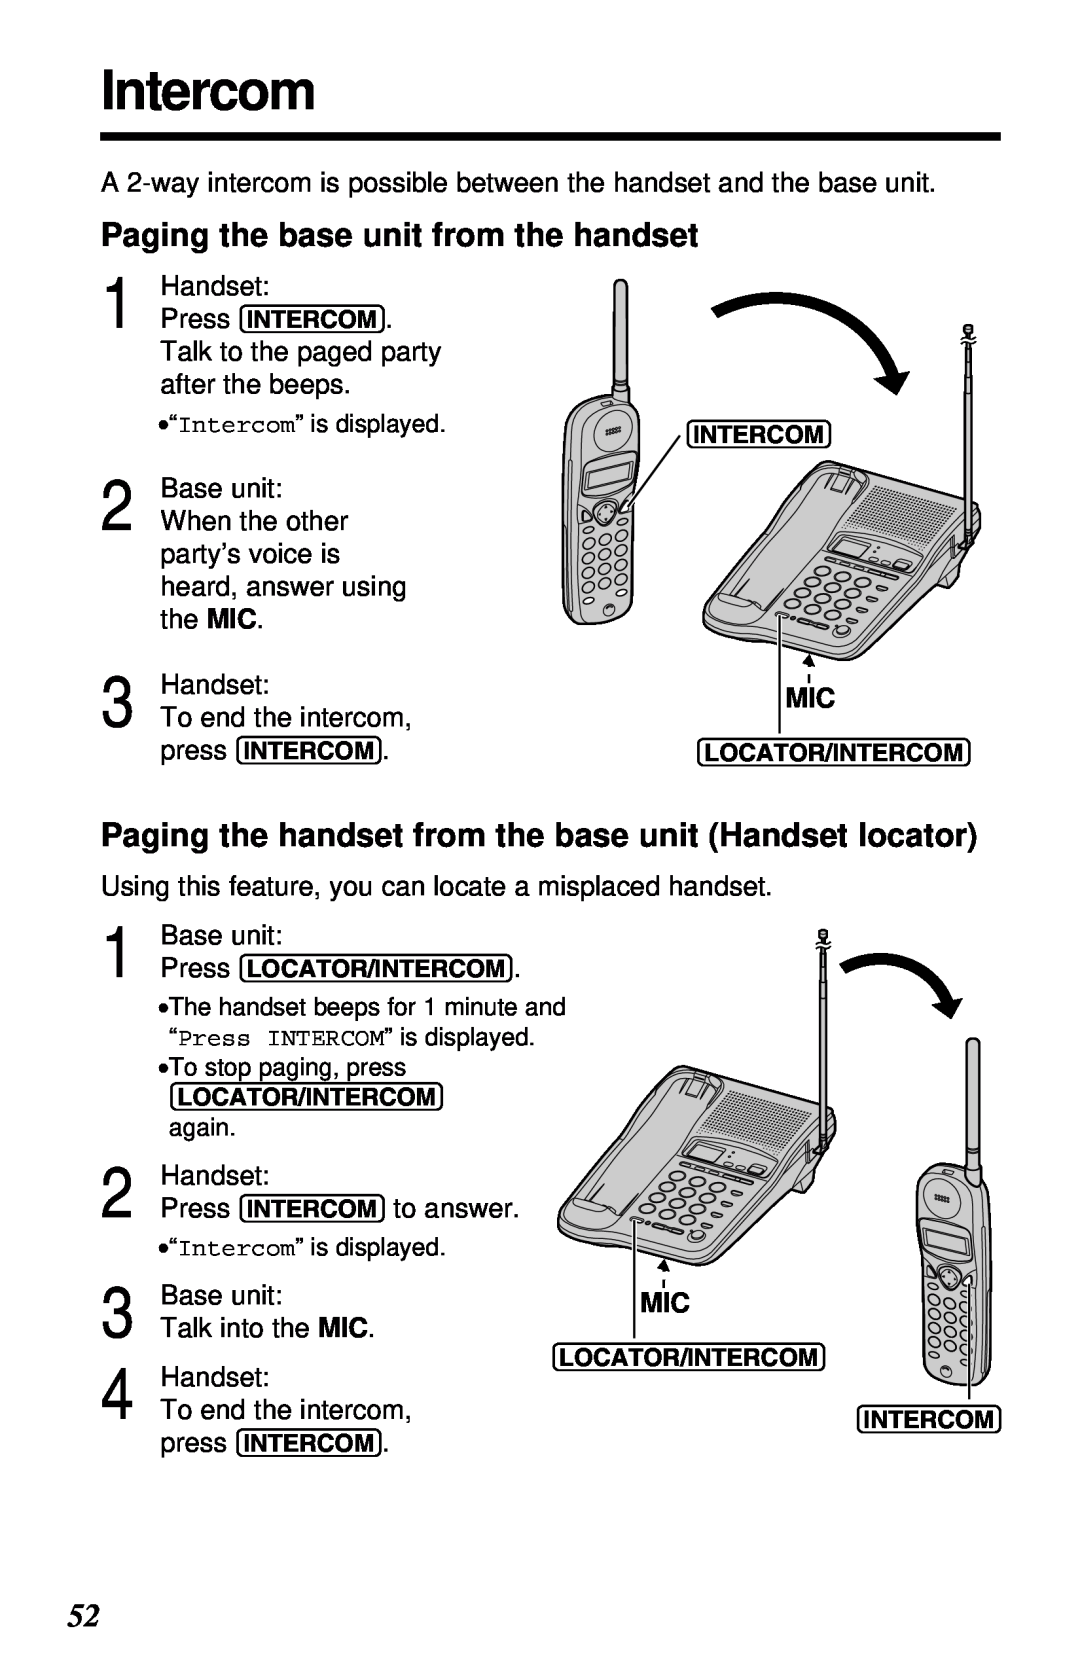 Panasonic KX-TC1230ALW, KX-TC1230NZW, KX-TC1230NZW, KX-TC1230ALW Intercom, Paging the base unit from the handset 